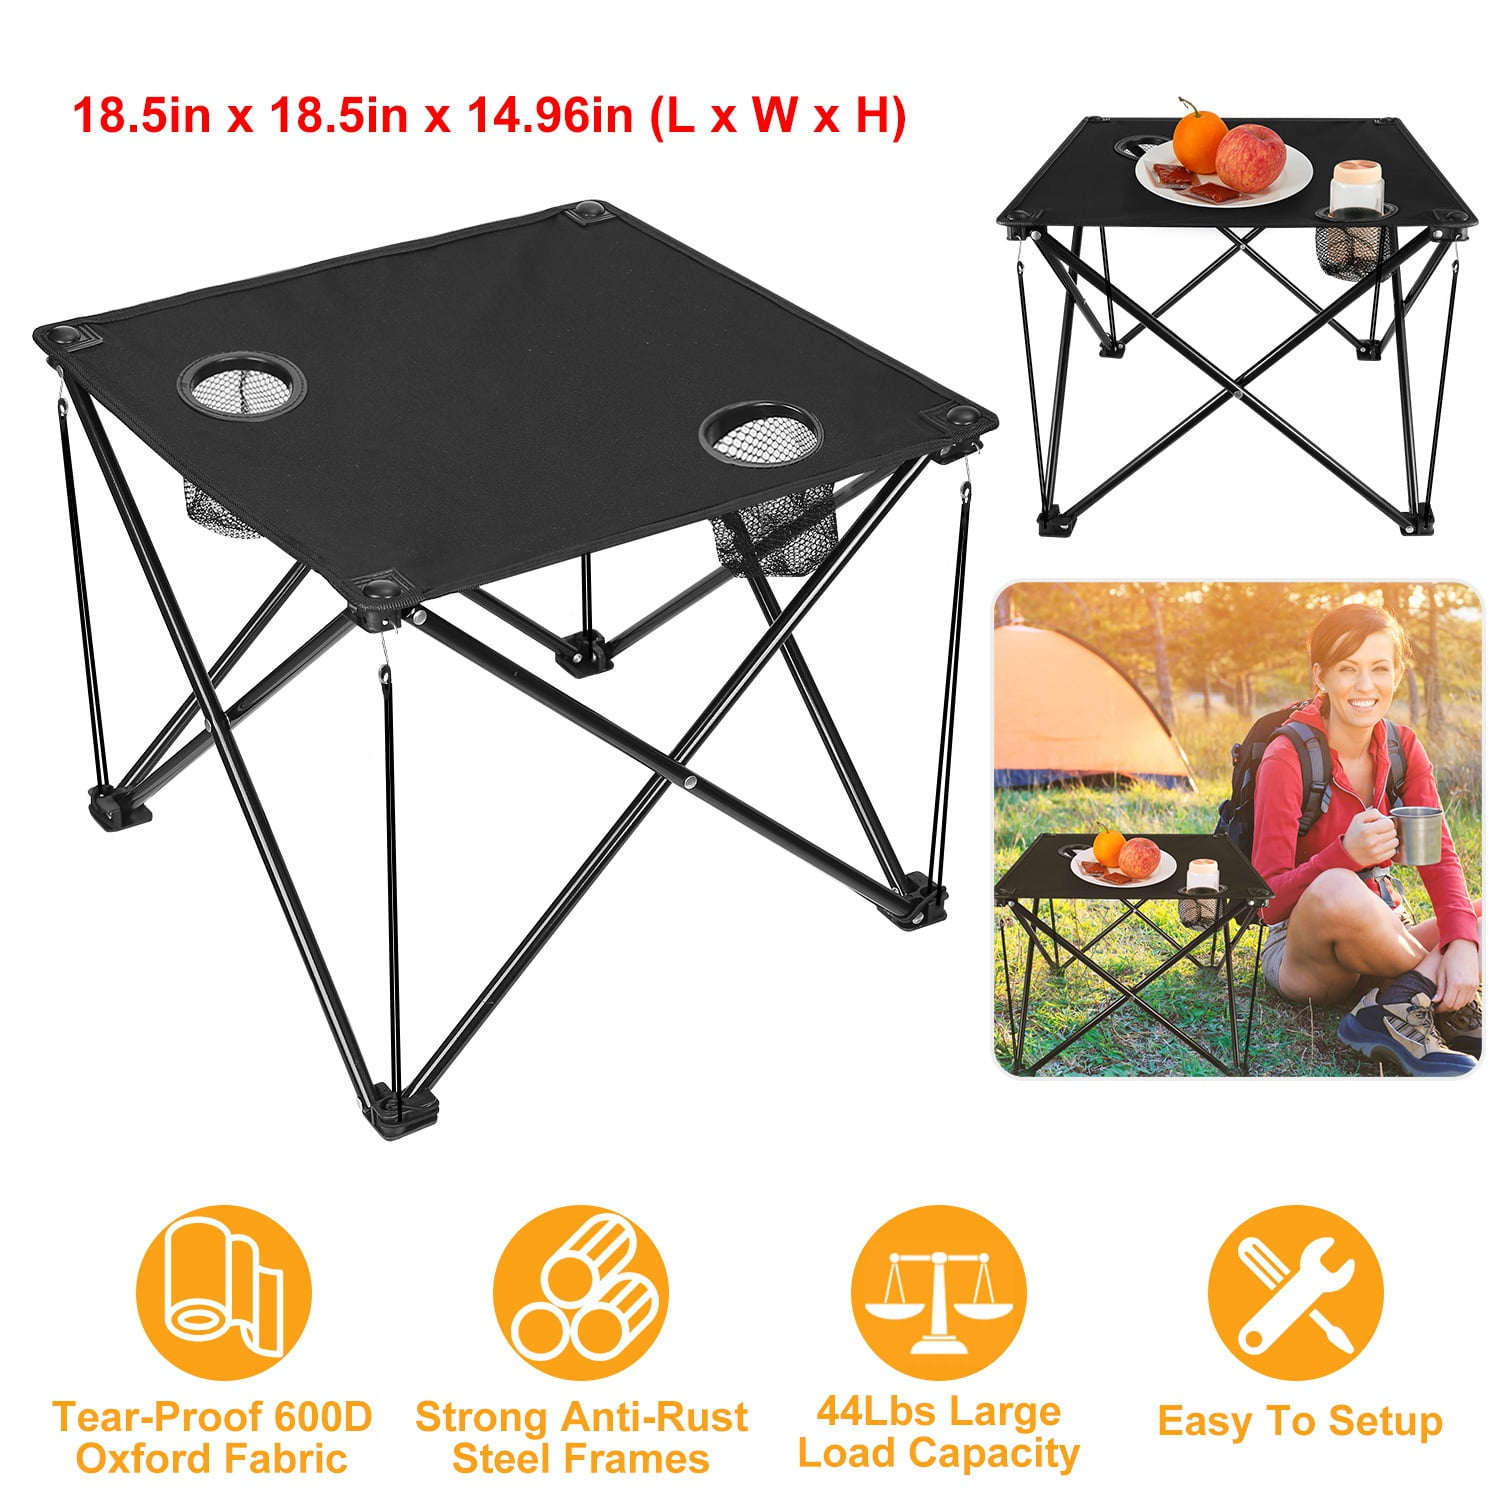 Portable Table Foldable Folding Camping Outdoor BBQ Travel Ultralight Desk 